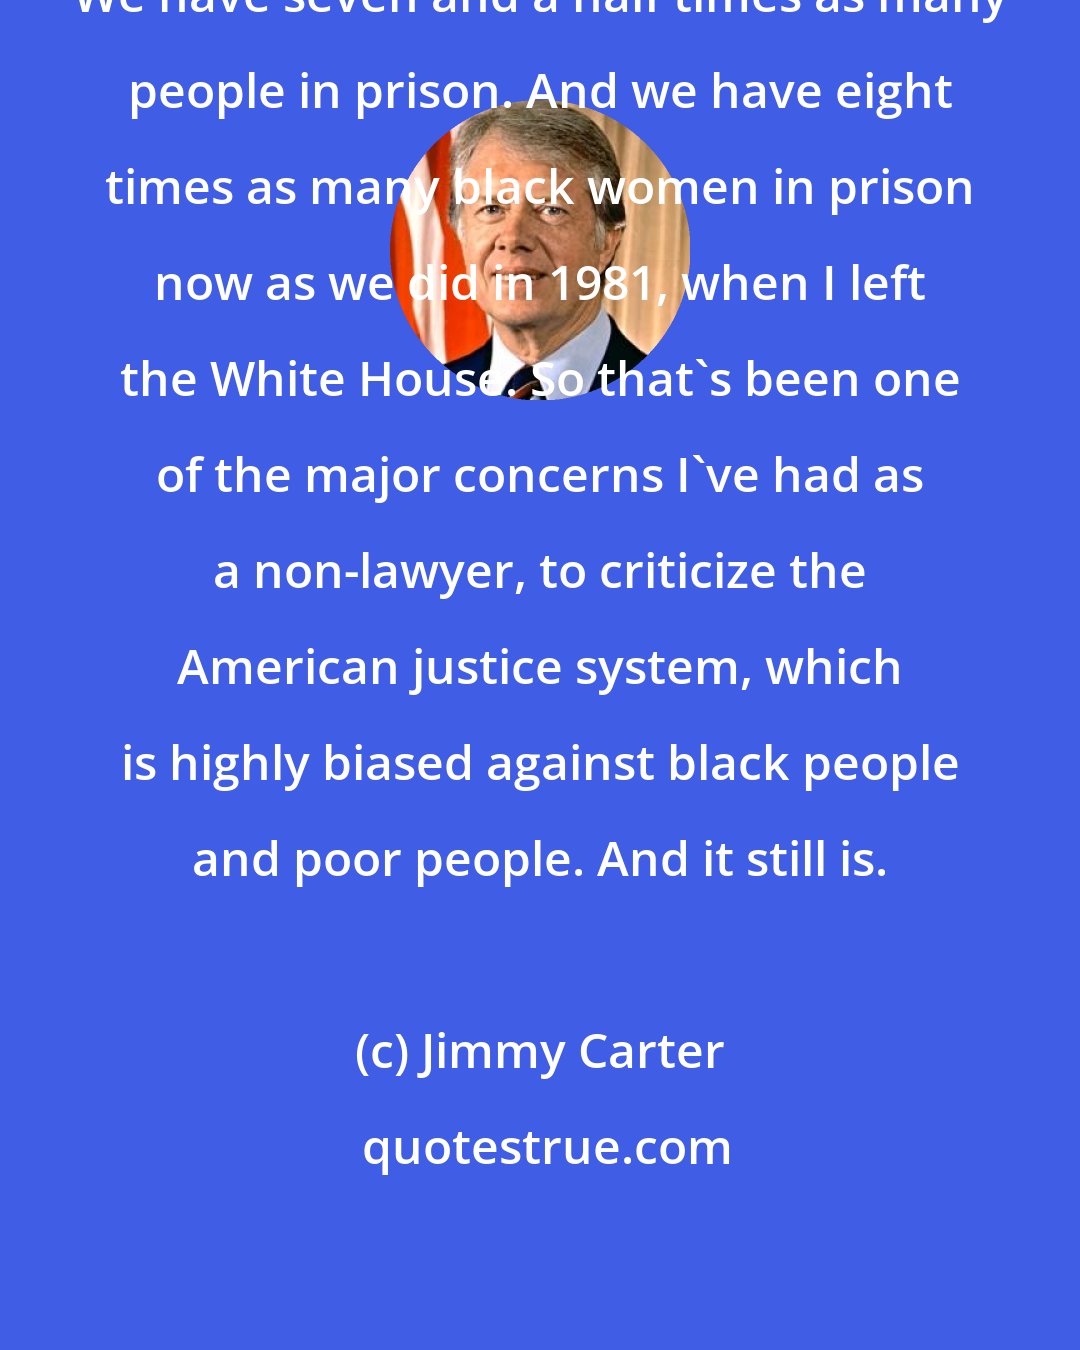 Jimmy Carter: We have seven and a half times as many people in prison. And we have eight times as many black women in prison now as we did in 1981, when I left the White House. So that's been one of the major concerns I've had as a non-lawyer, to criticize the American justice system, which is highly biased against black people and poor people. And it still is.